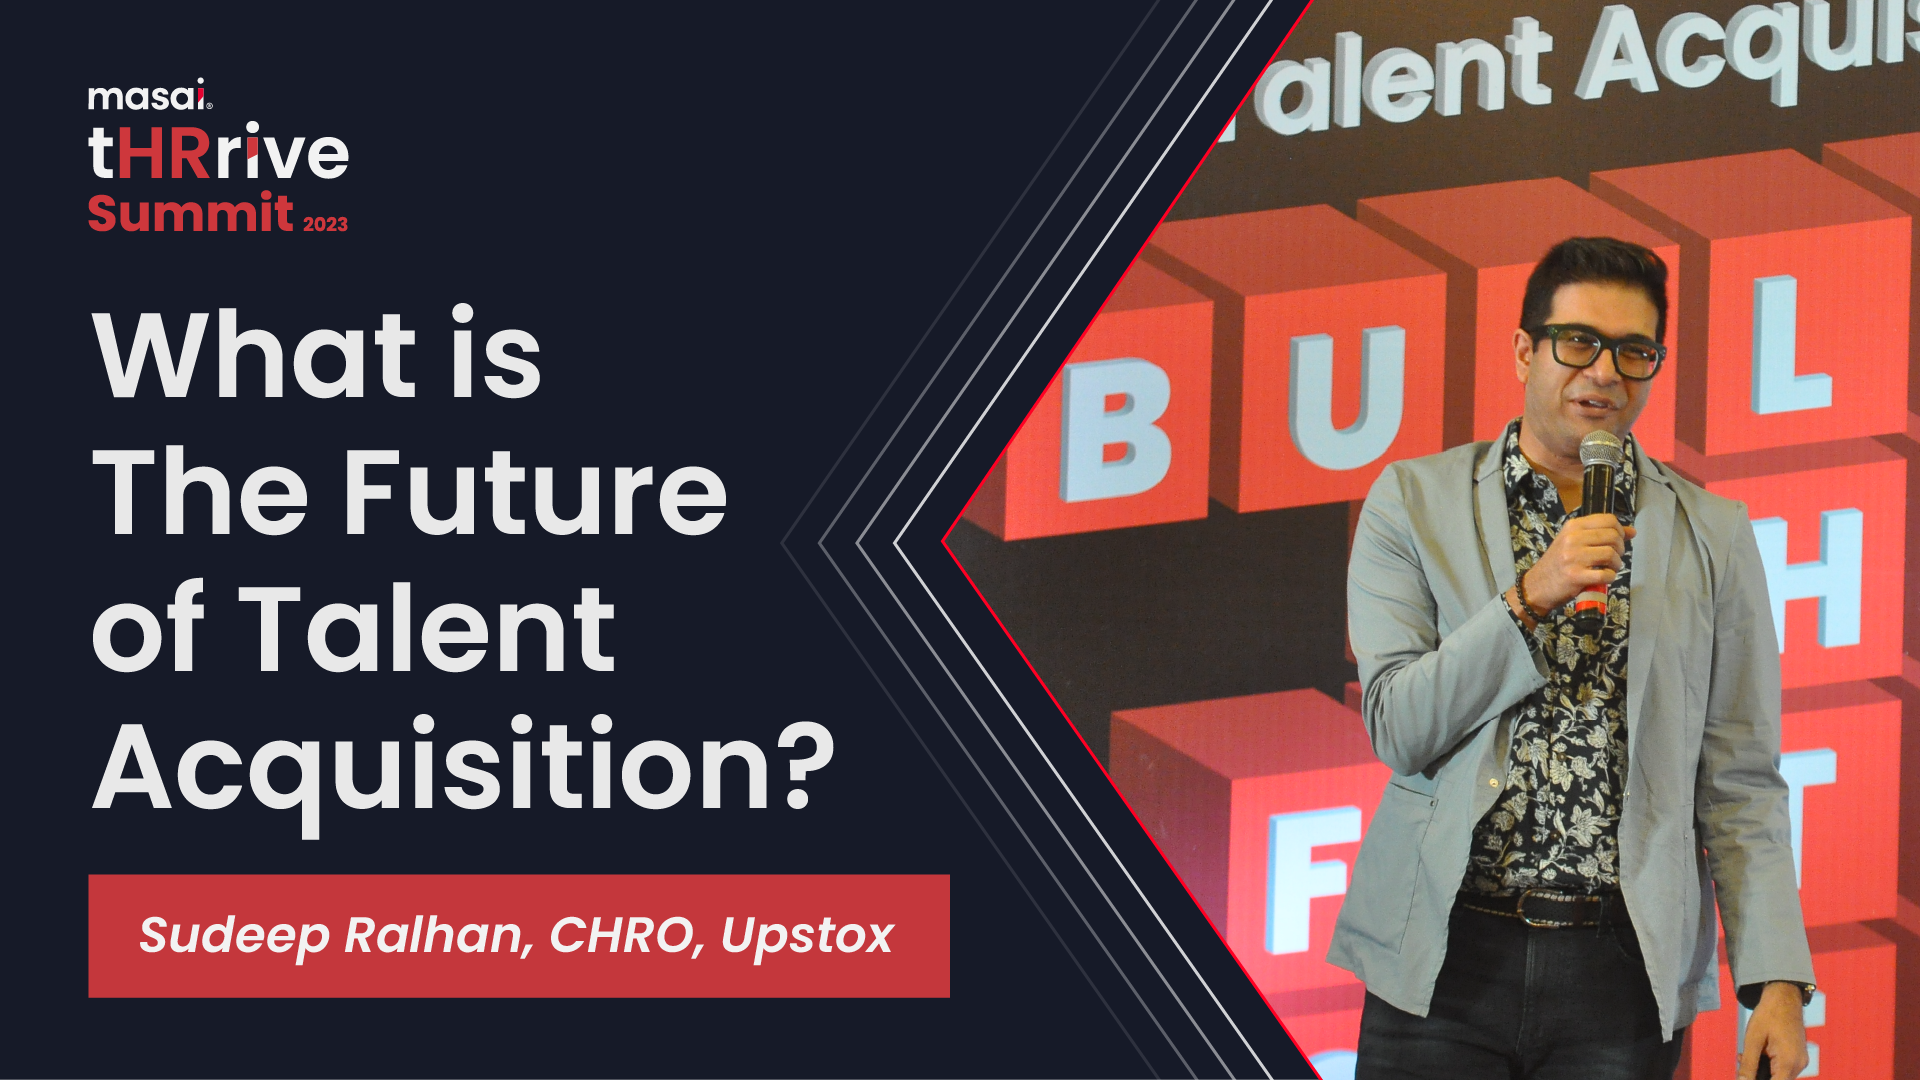 What is The Future of Talent Acquisition? - A Keynote Speech by Sudeep Ralhan, CHRO, Upstox